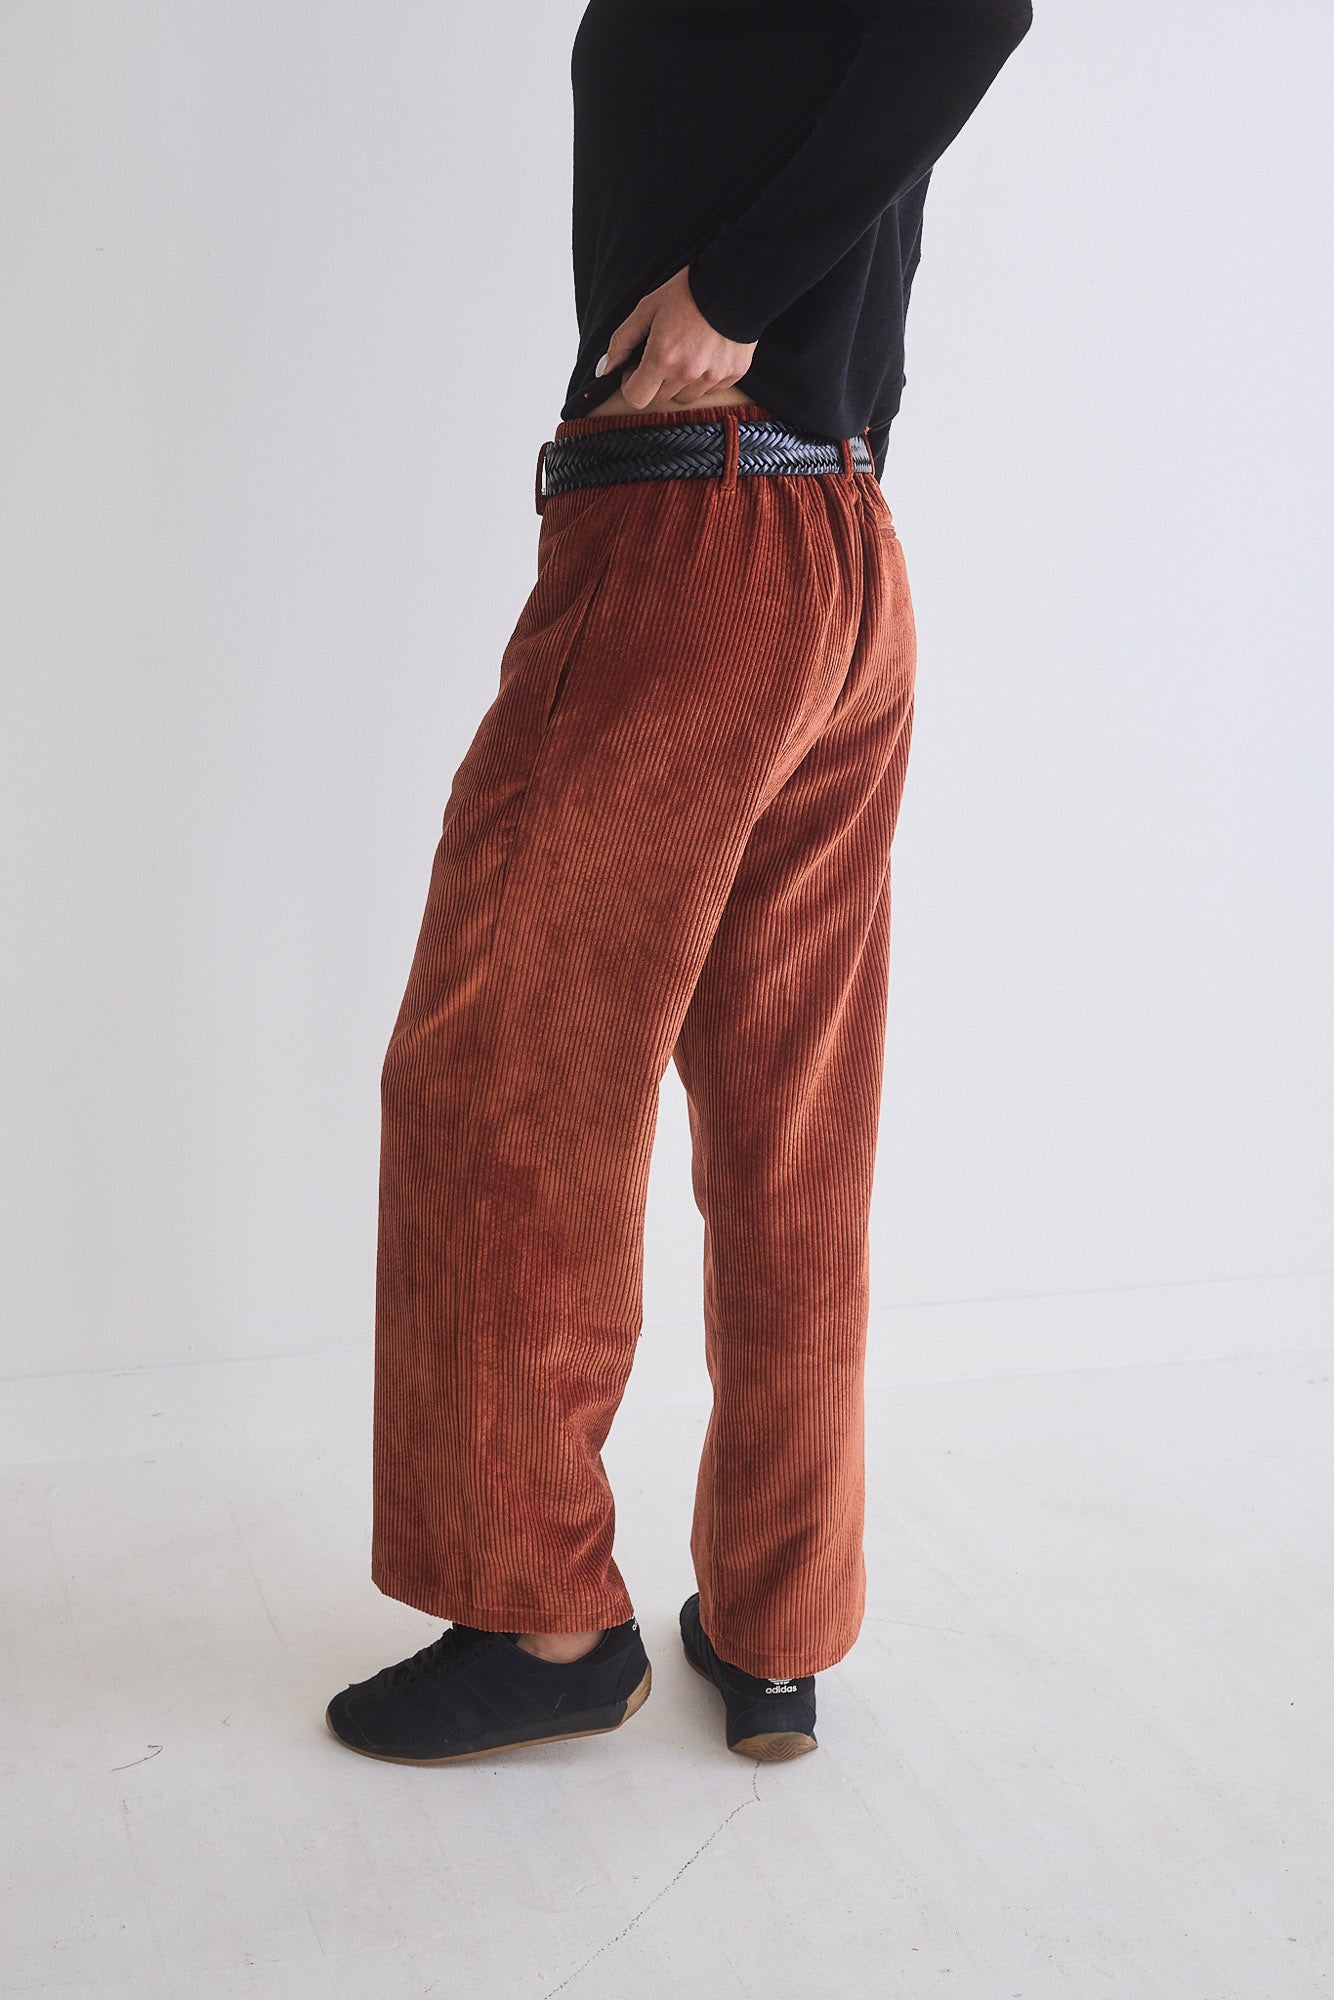 The Corduroy Pants from the 70s – Ruti